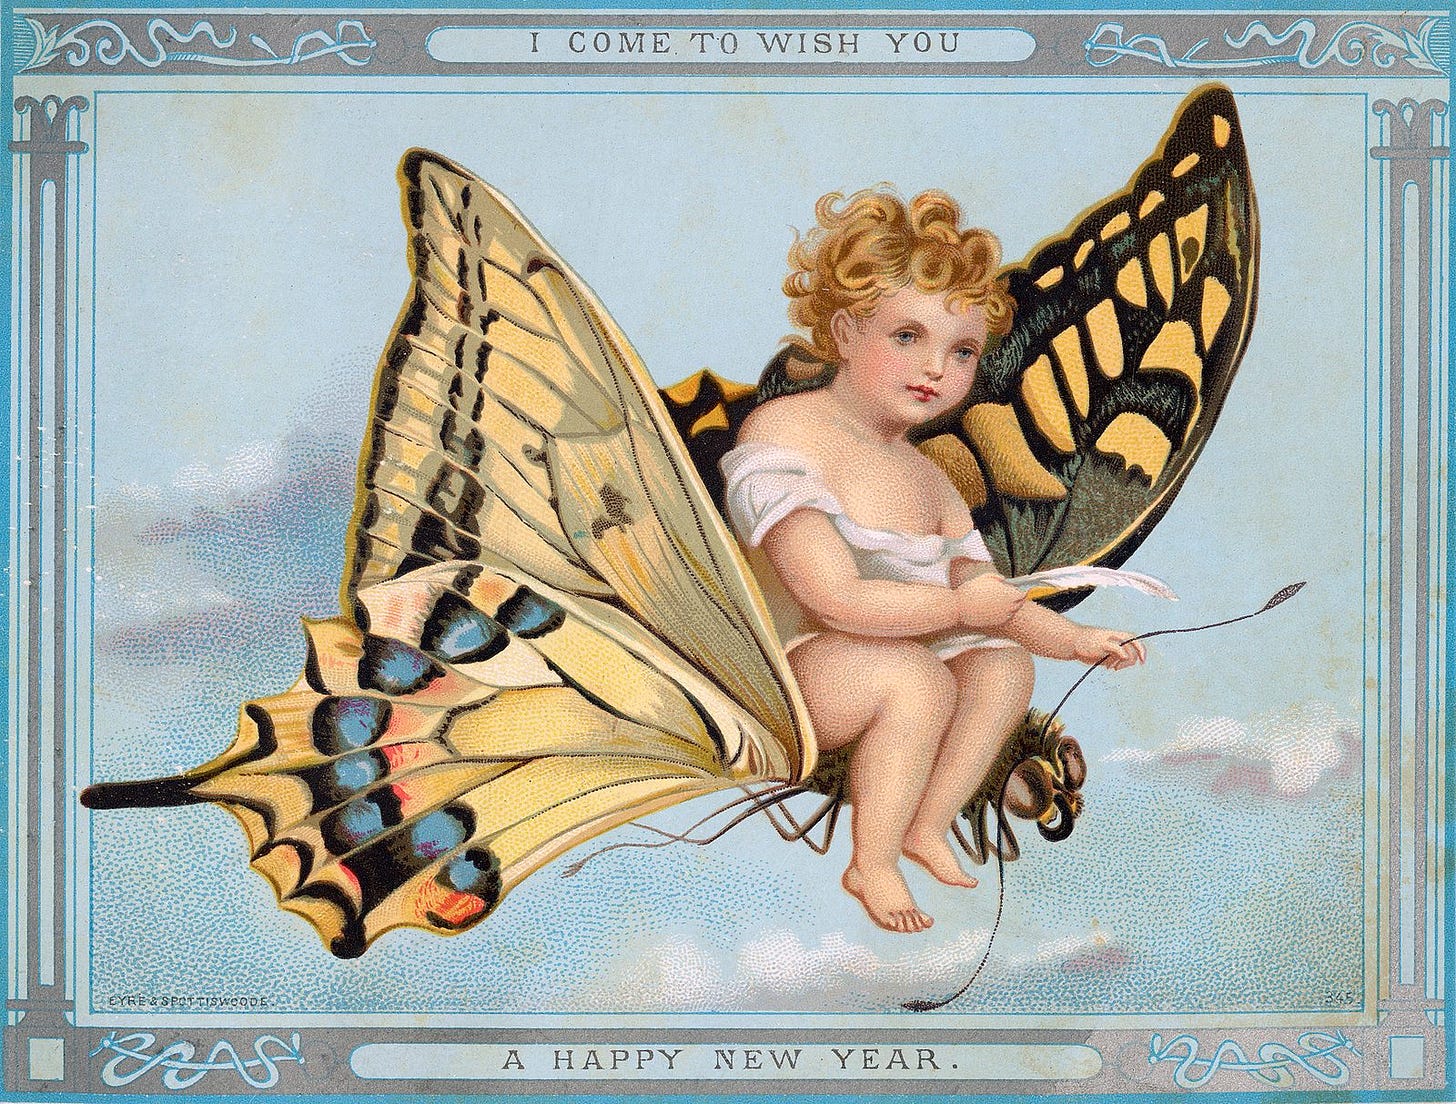 A chrubic child rides a butterfly. The caption reads I come to wish you a happy new year. Vintage card.